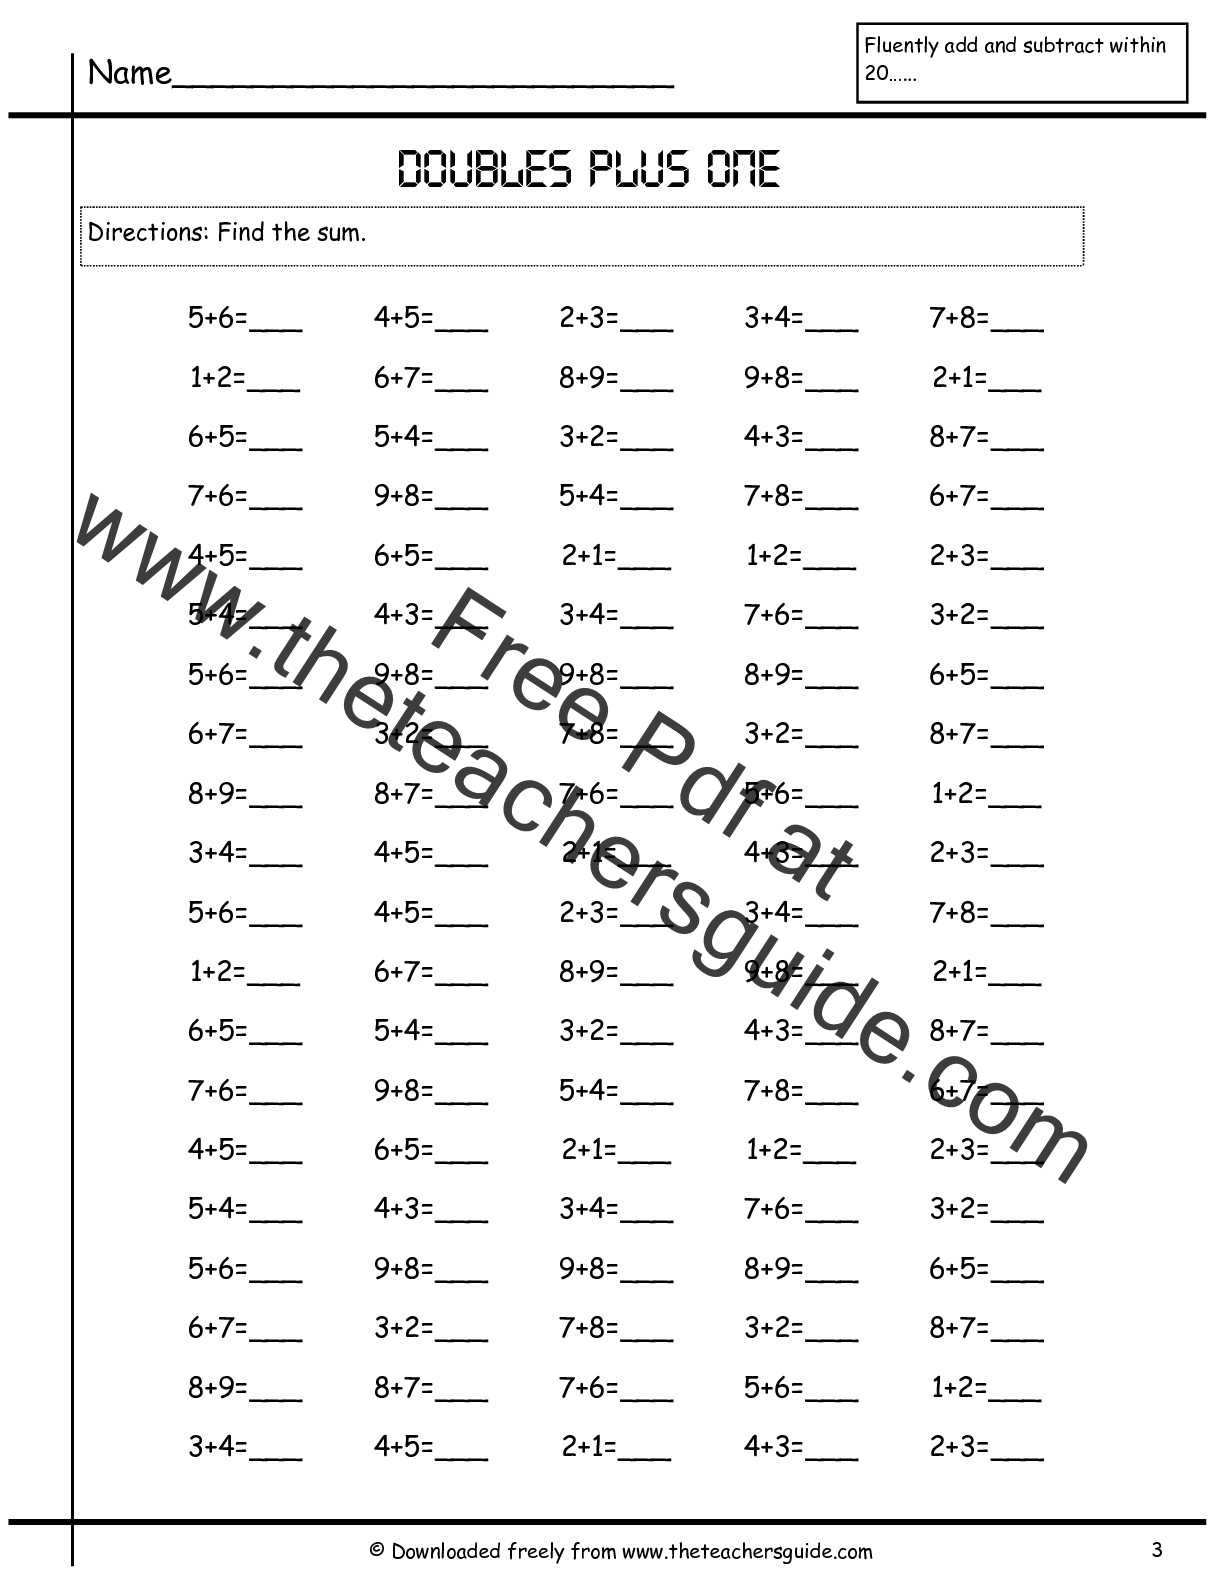 Single Digit Addition Worksheets from The Teacher's Guide